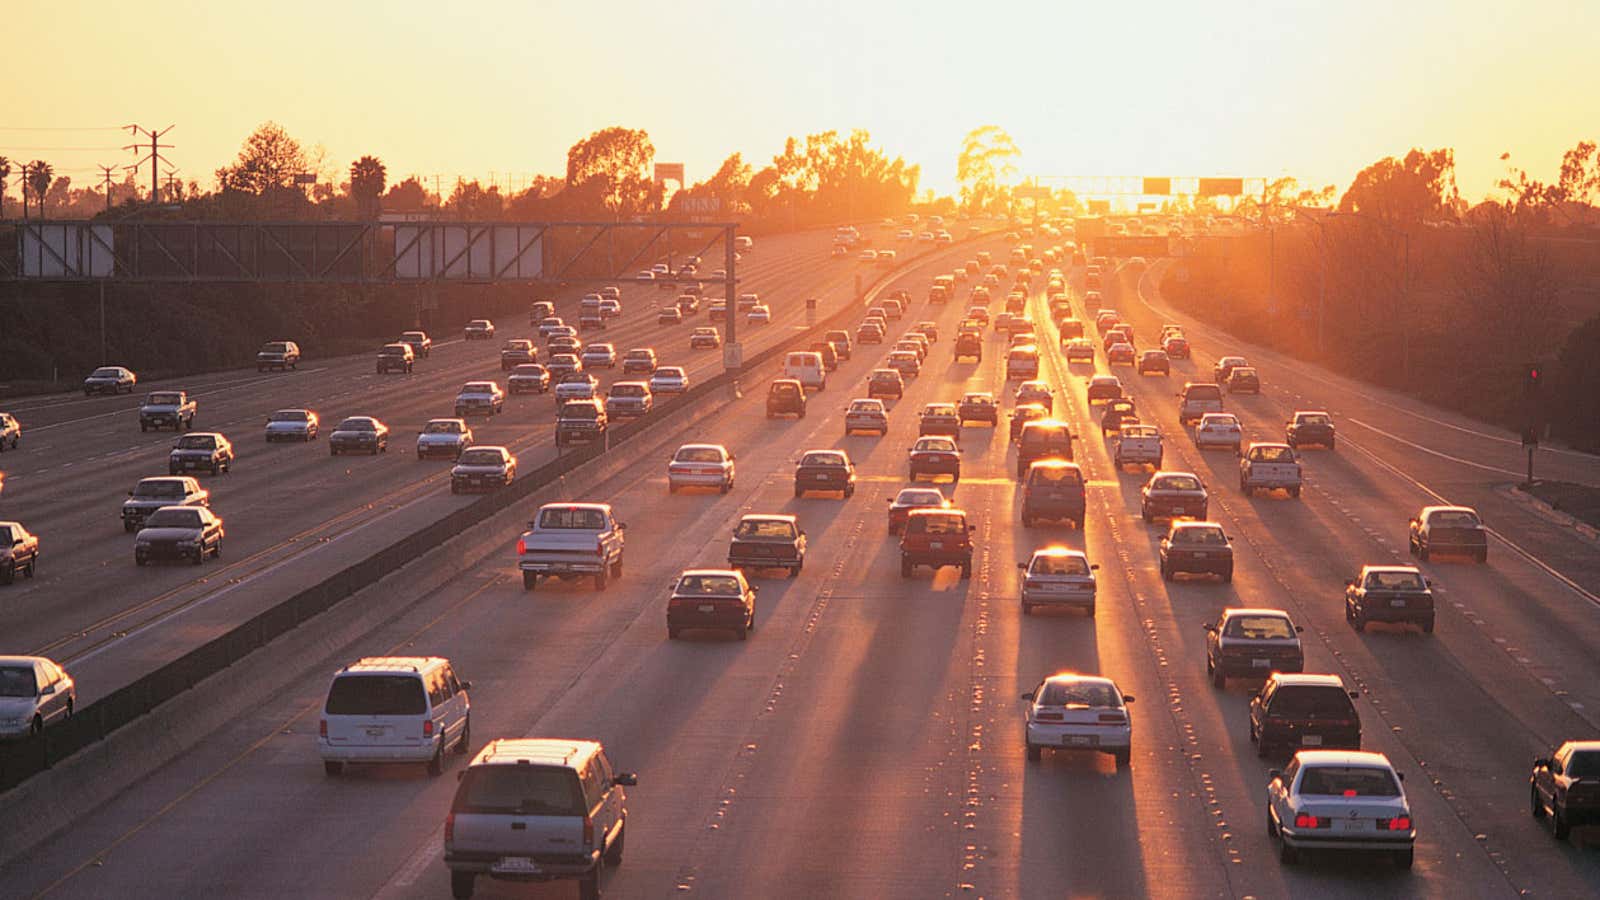 With driverless cars, we soon will safely enjoy the sunsets during the commute home.